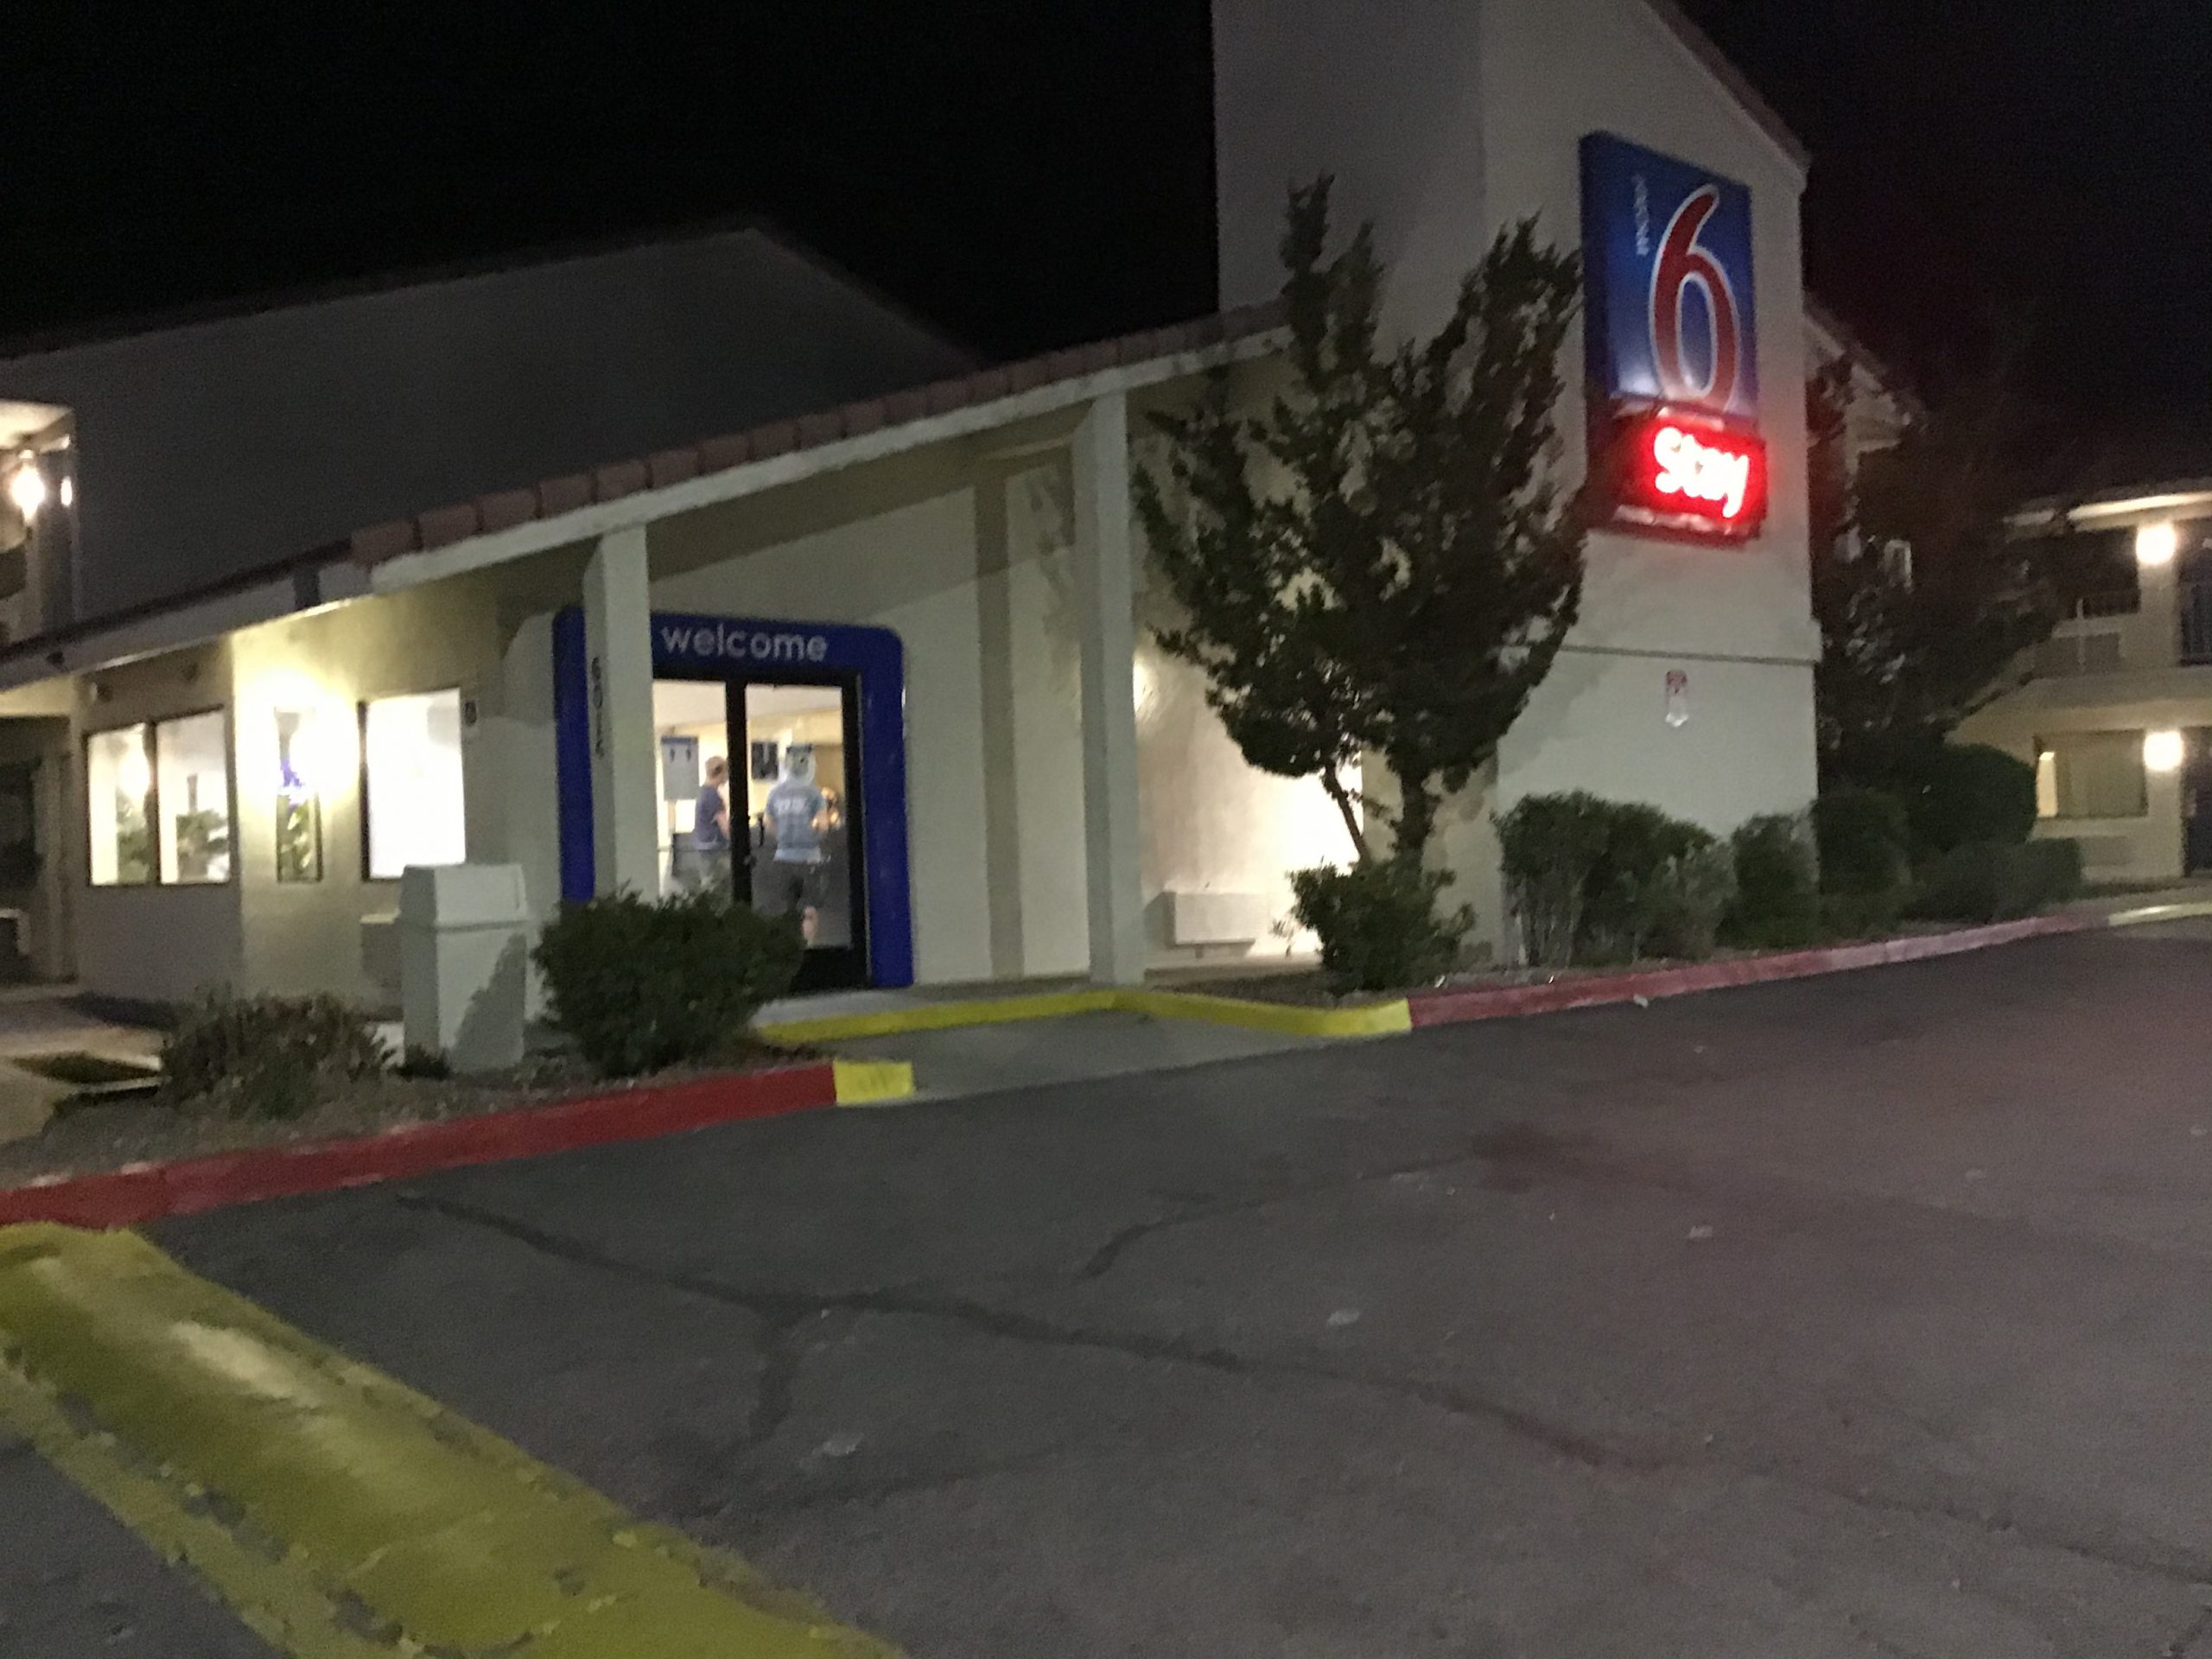 Motel 6 complaint Refused service and was very rude